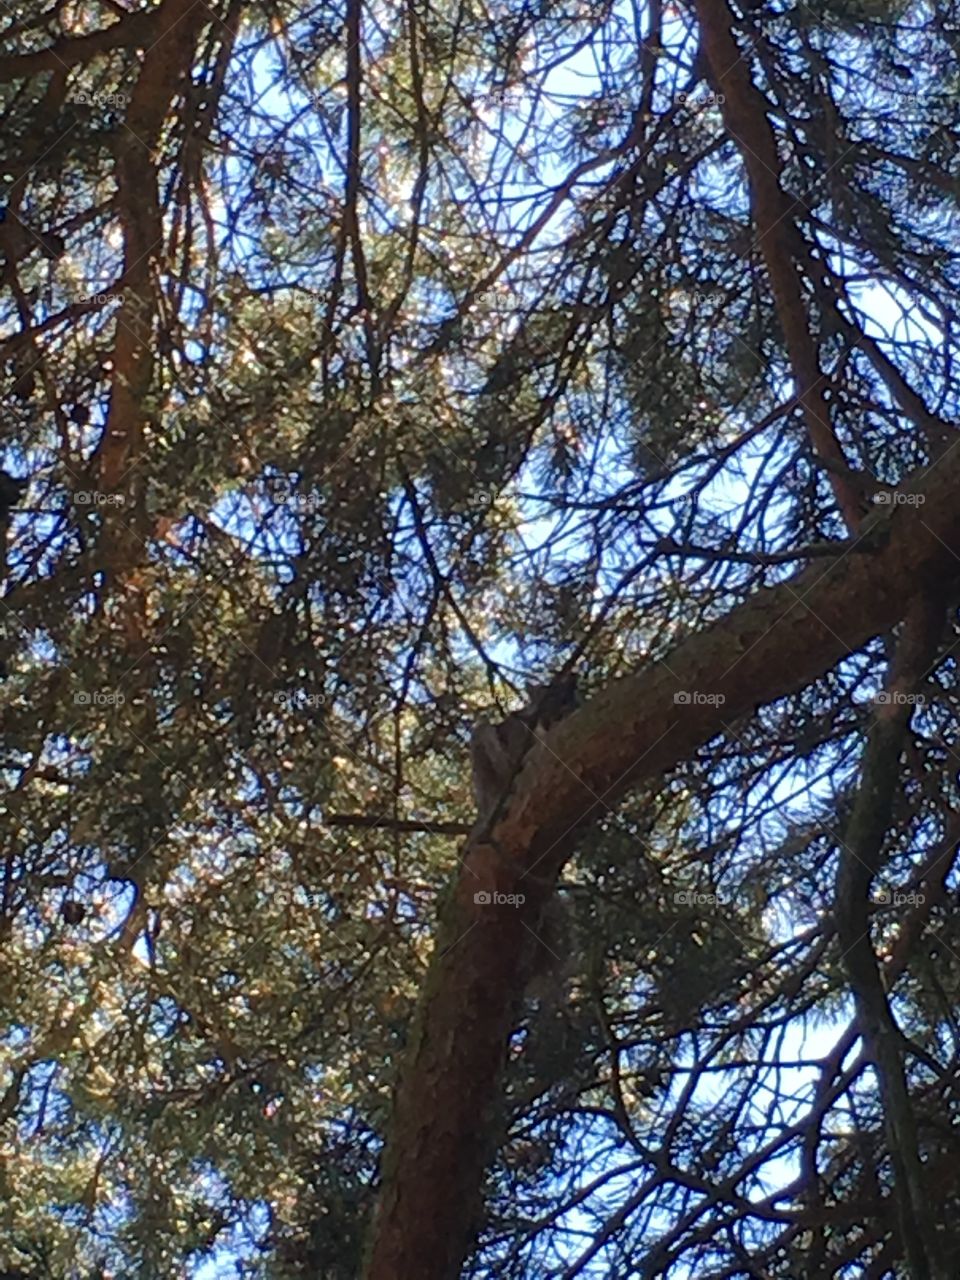 A grey squirrel climbing on a branch in a pine tree in my garden in summer 